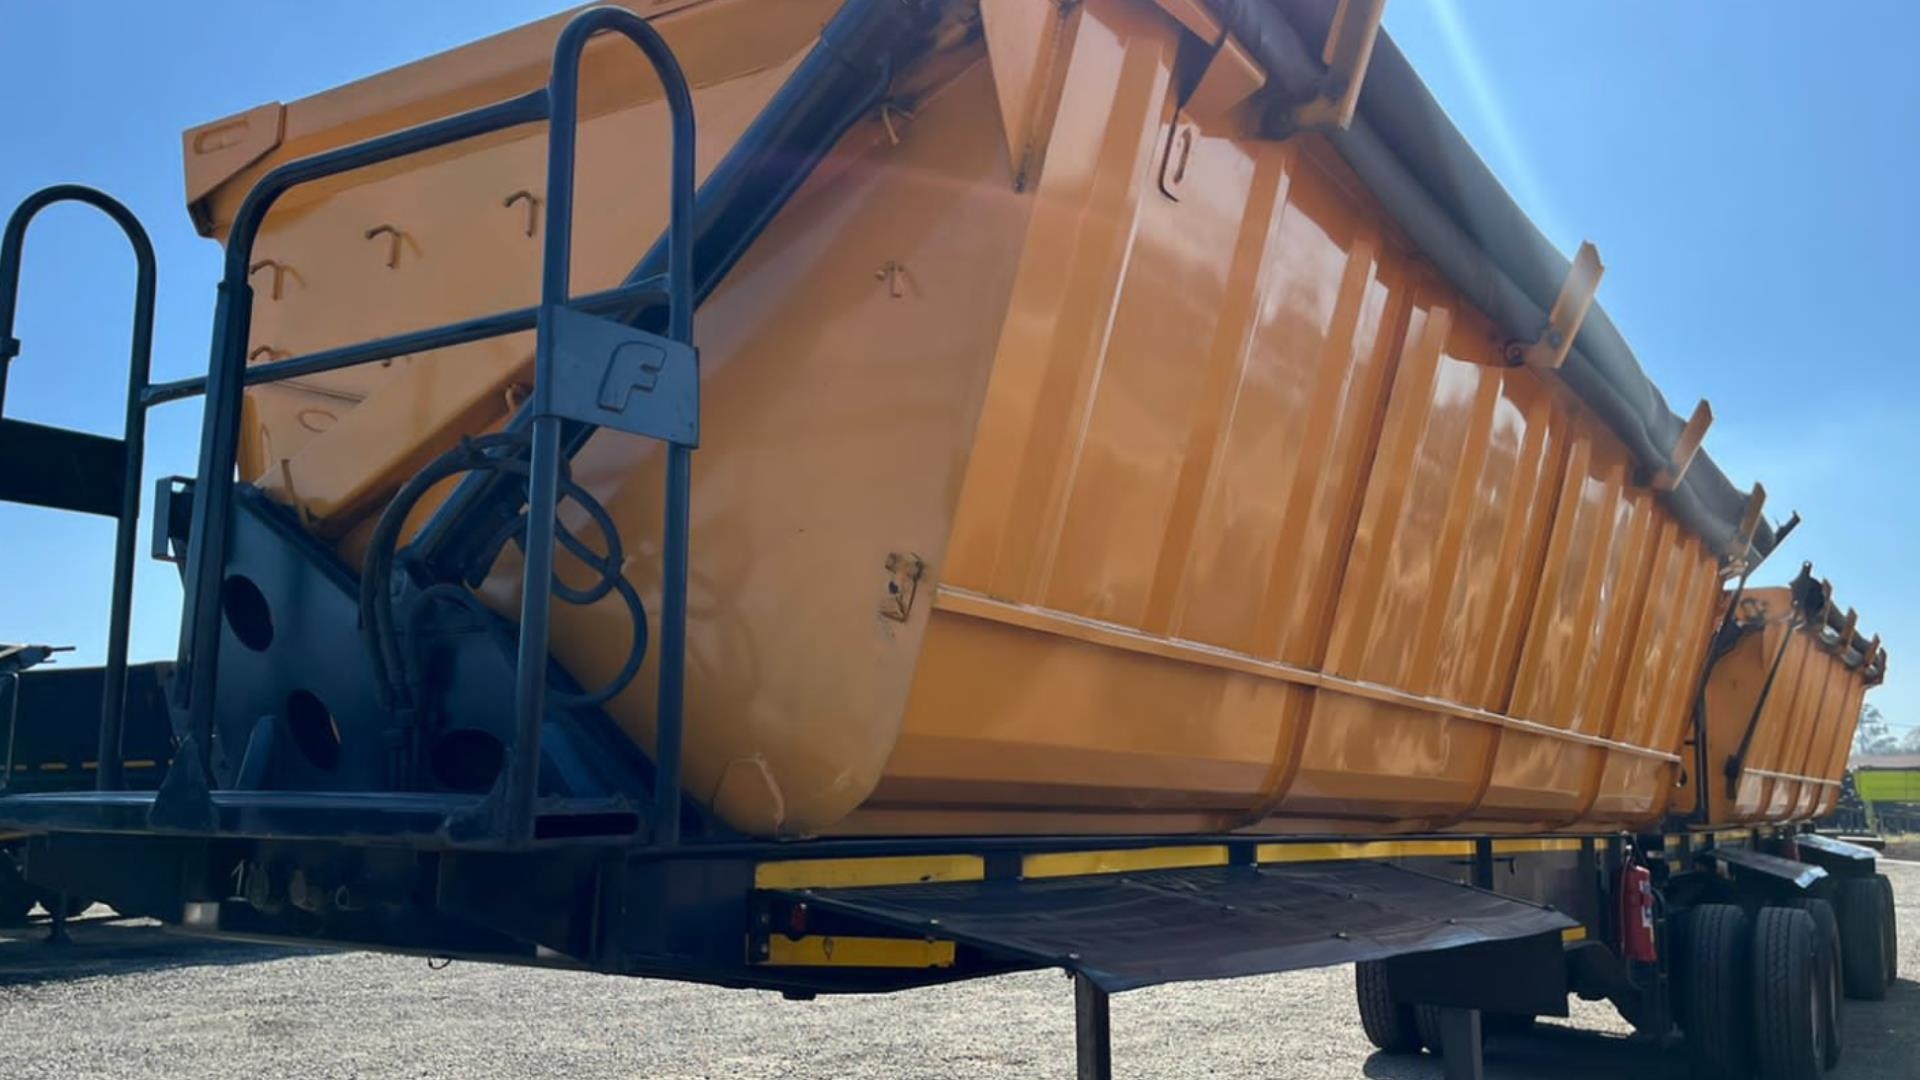 CIMC Trailers 2017 CIMC 40m3 2017 for sale by Truck and Plant Connection | Truck & Trailer Marketplaces